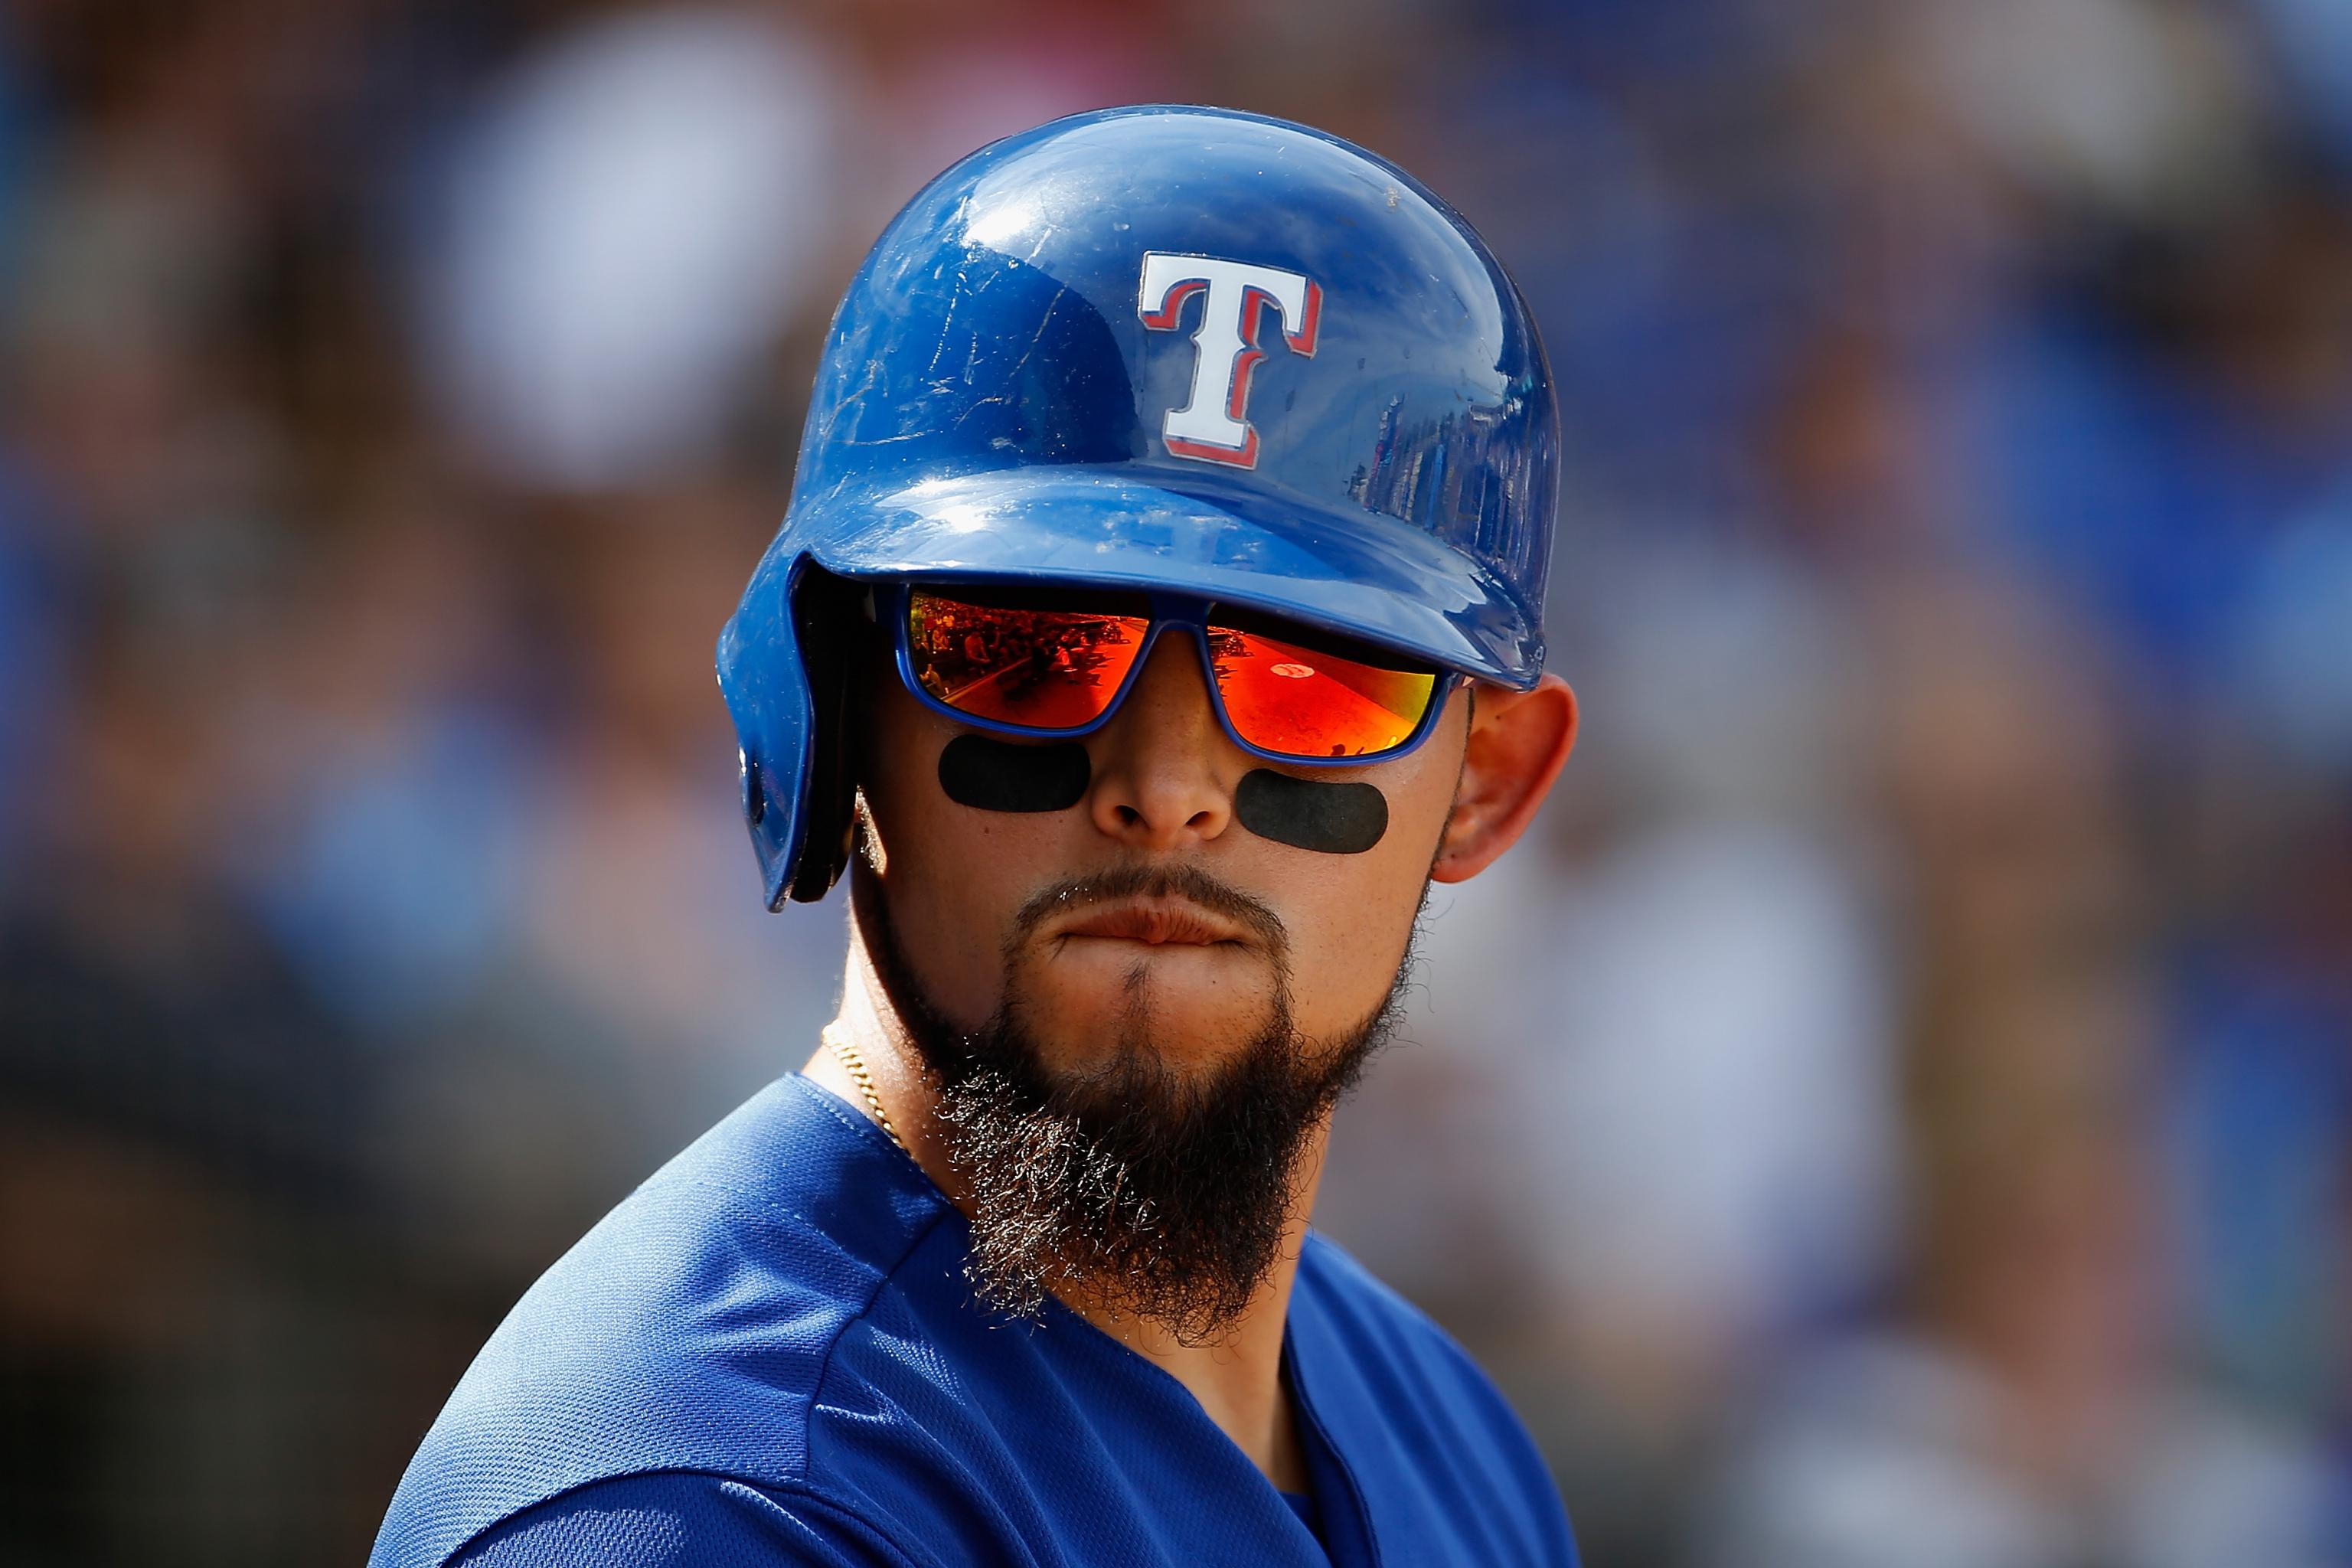 MLB.com hasn't updated Rougned Odor's photo yet, so we have a